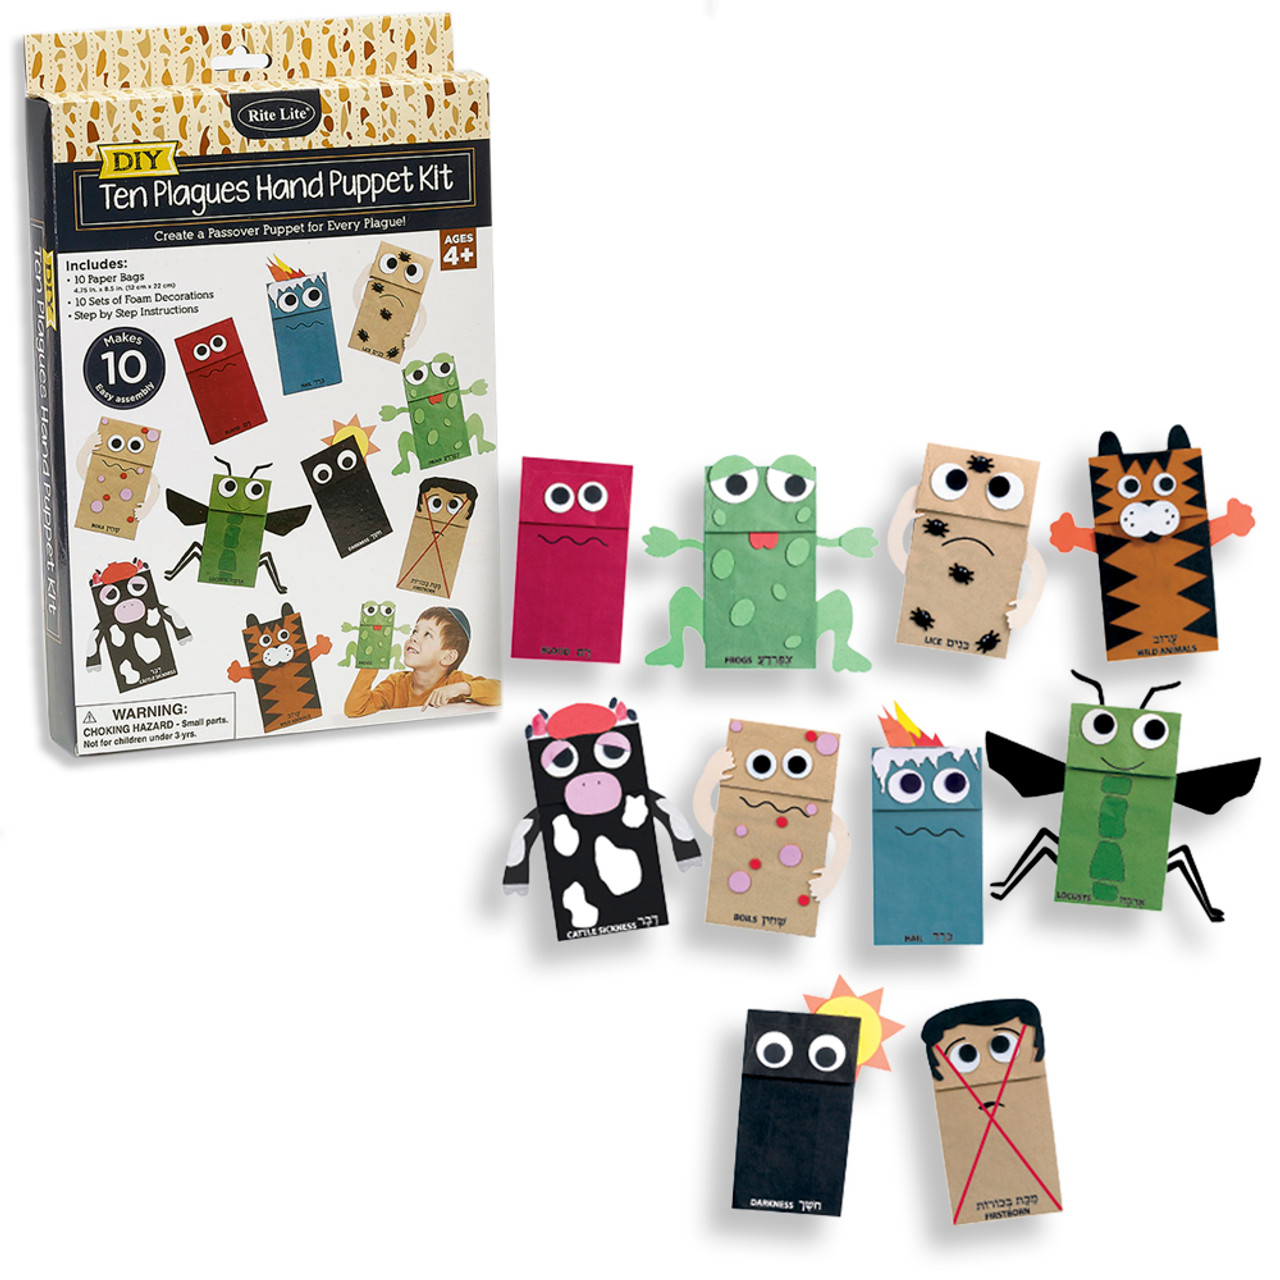 10 Plagues Hand Puppet Kit  Buy at the Jewish School Supply Company